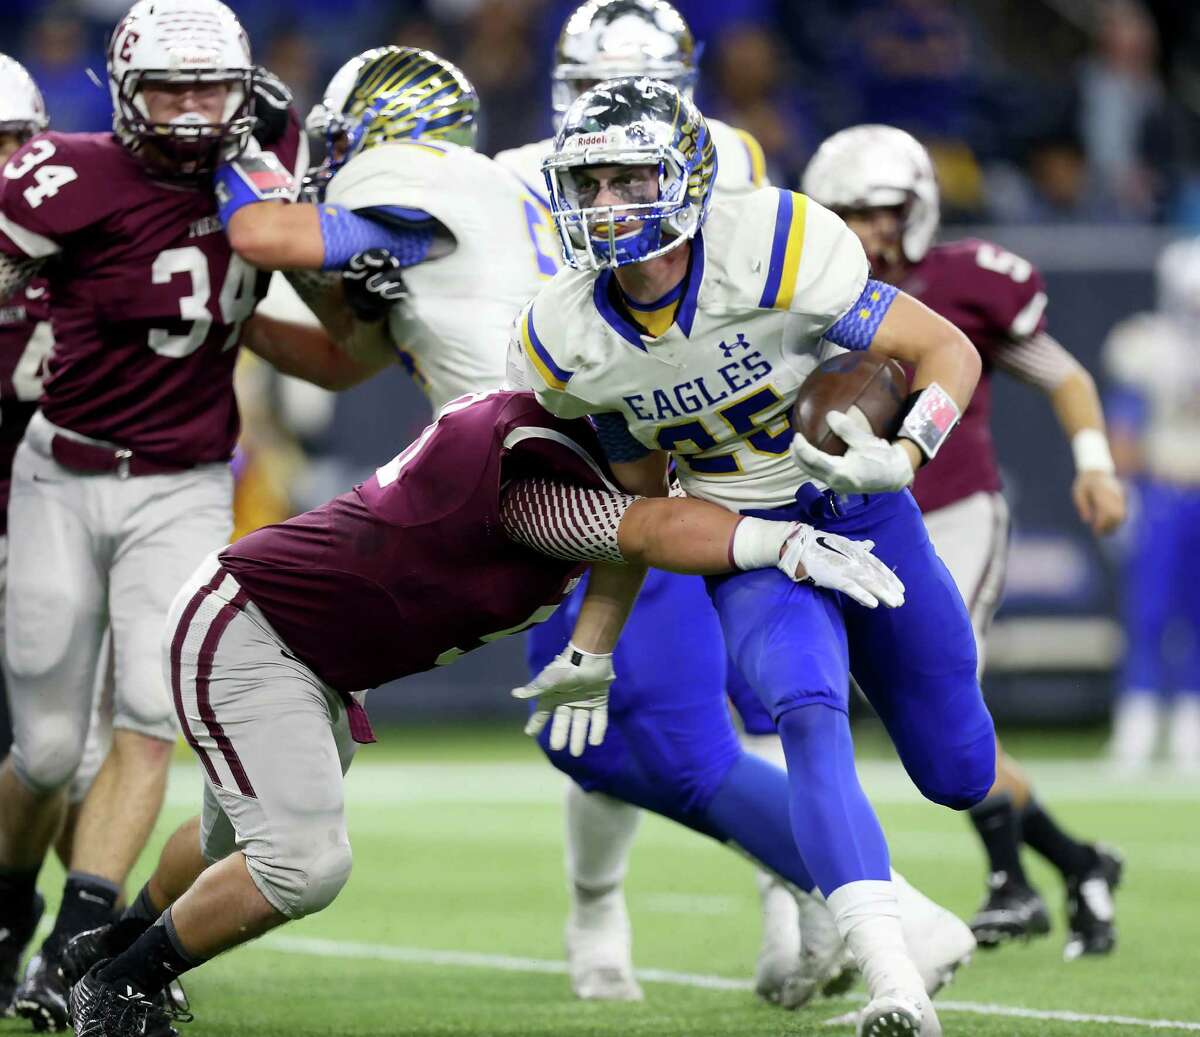 Cameron Yoe's Eddie Luna, left, stops Brock's Leddy French in the first half Thursday night. French ran for 133 yards and three touchdowns.